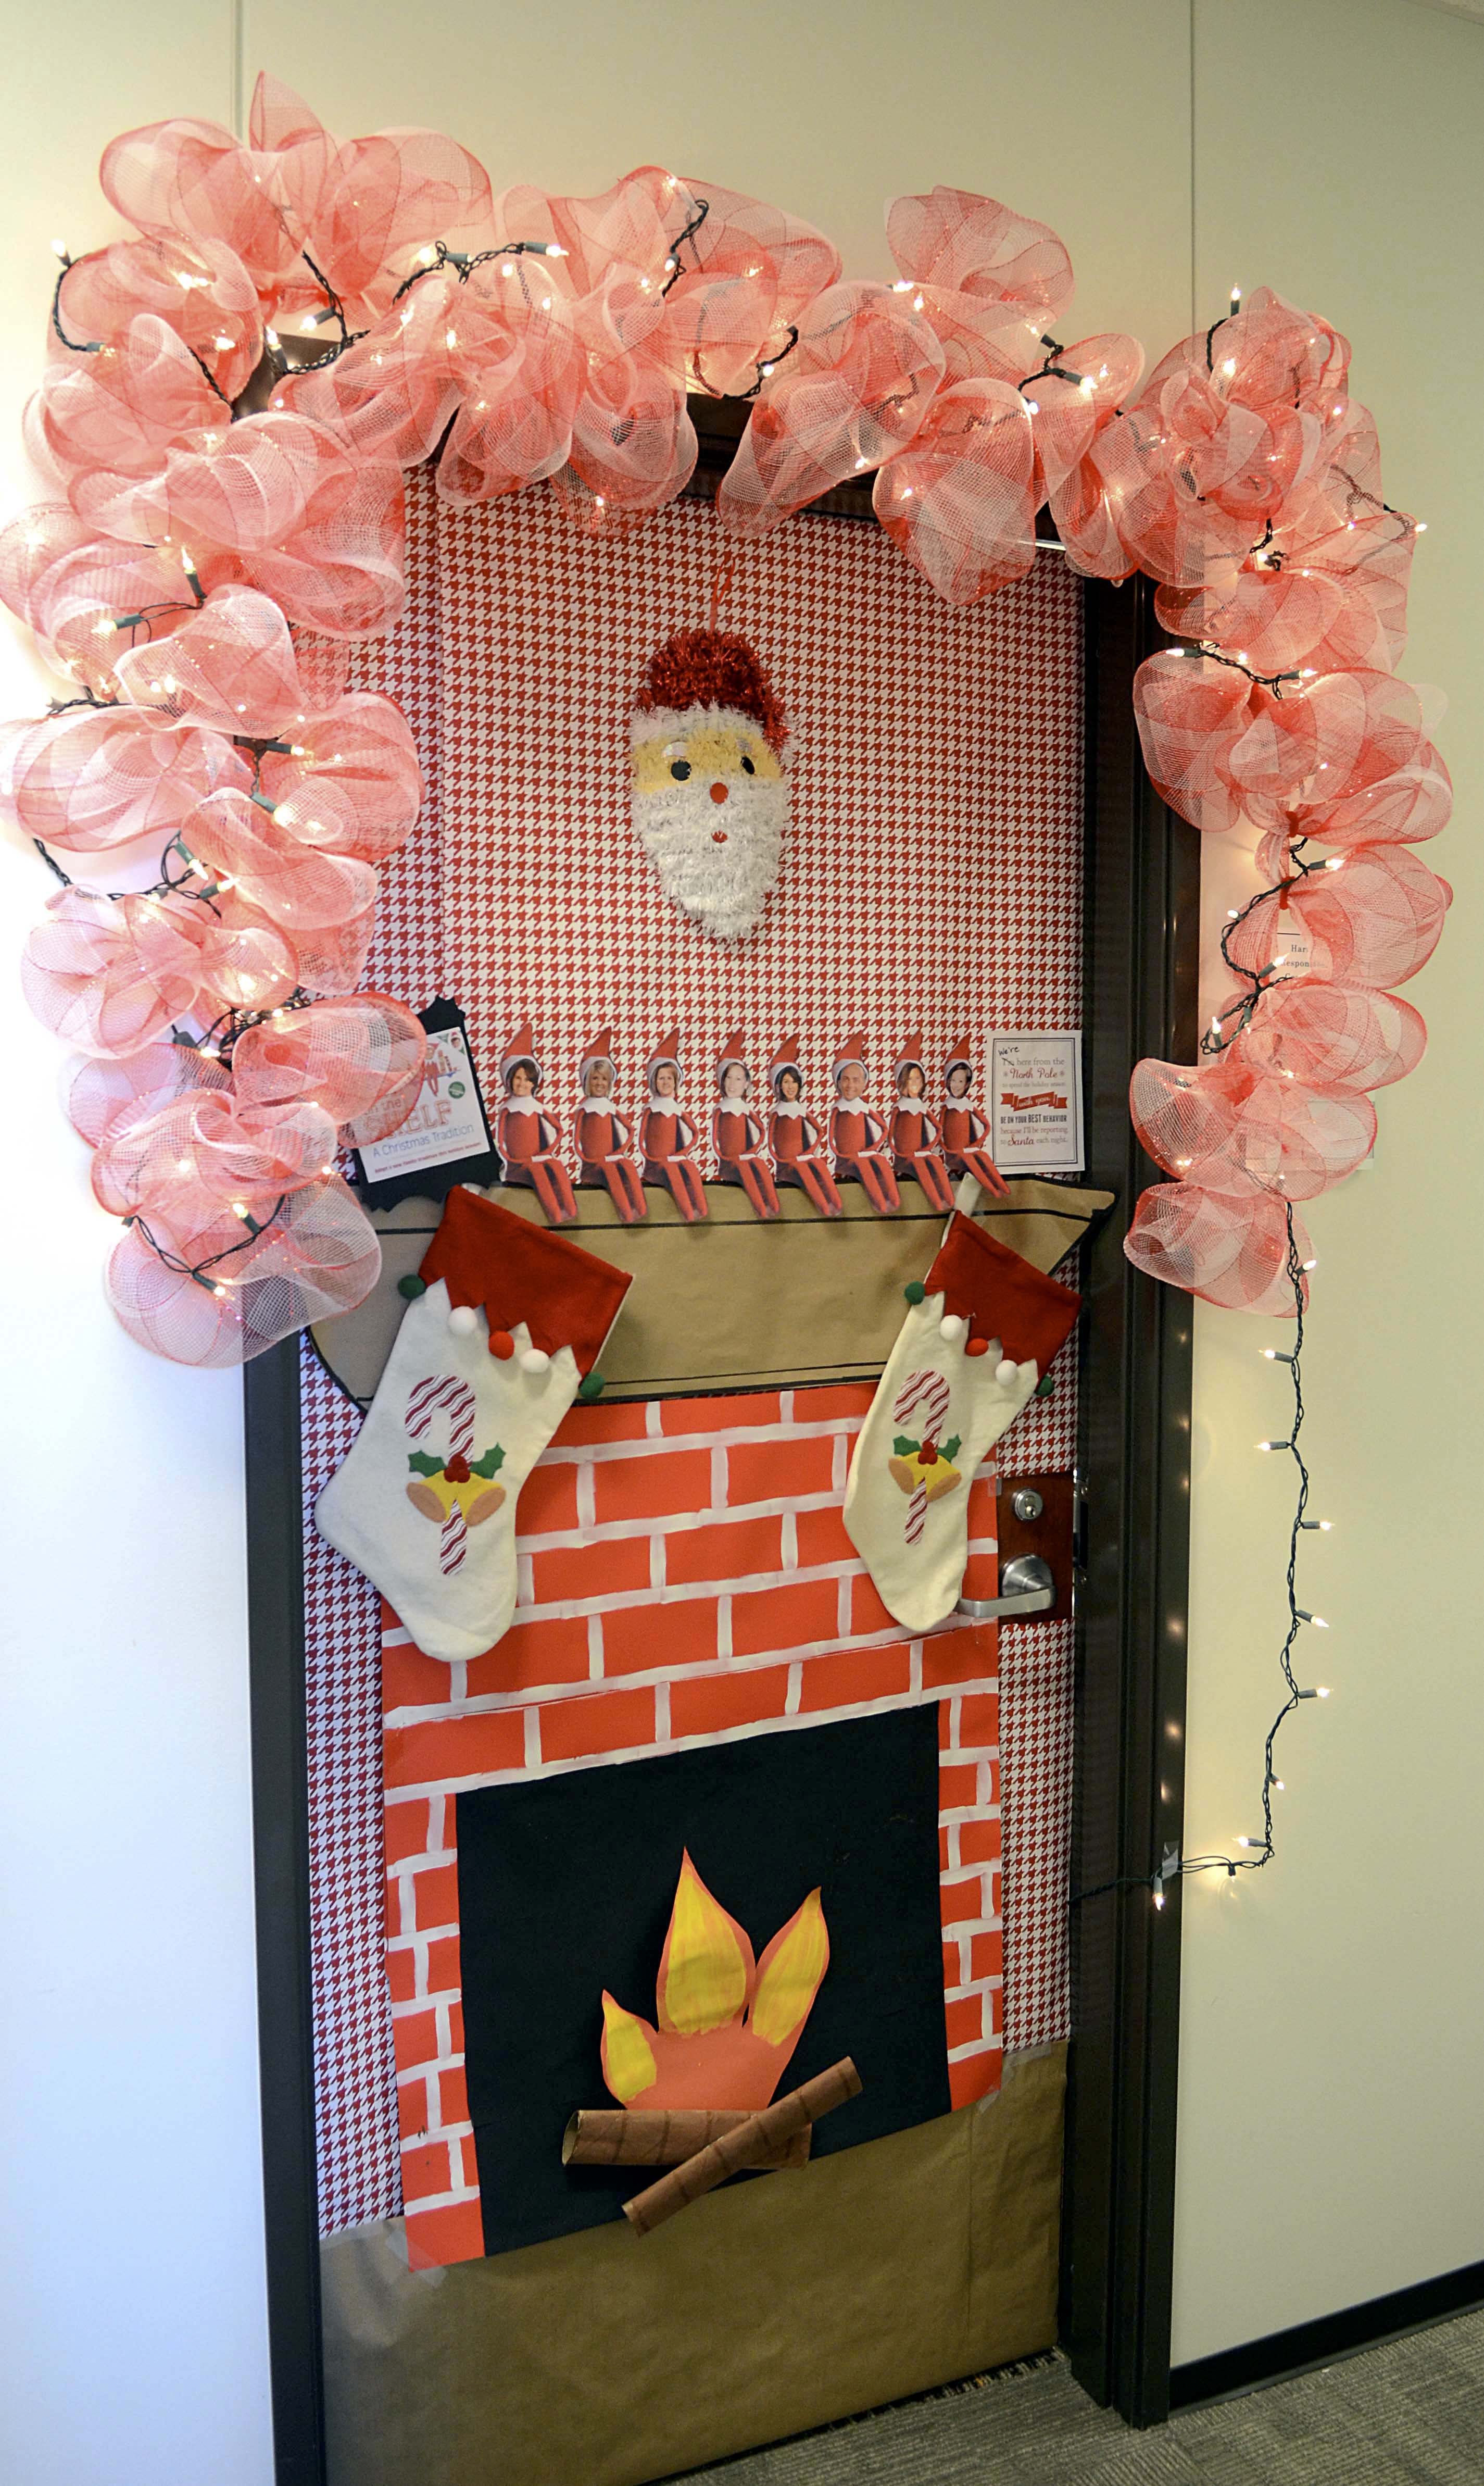 Door Decoration Contest Sparks New Tti Tradition Texas A M Transportation Institute